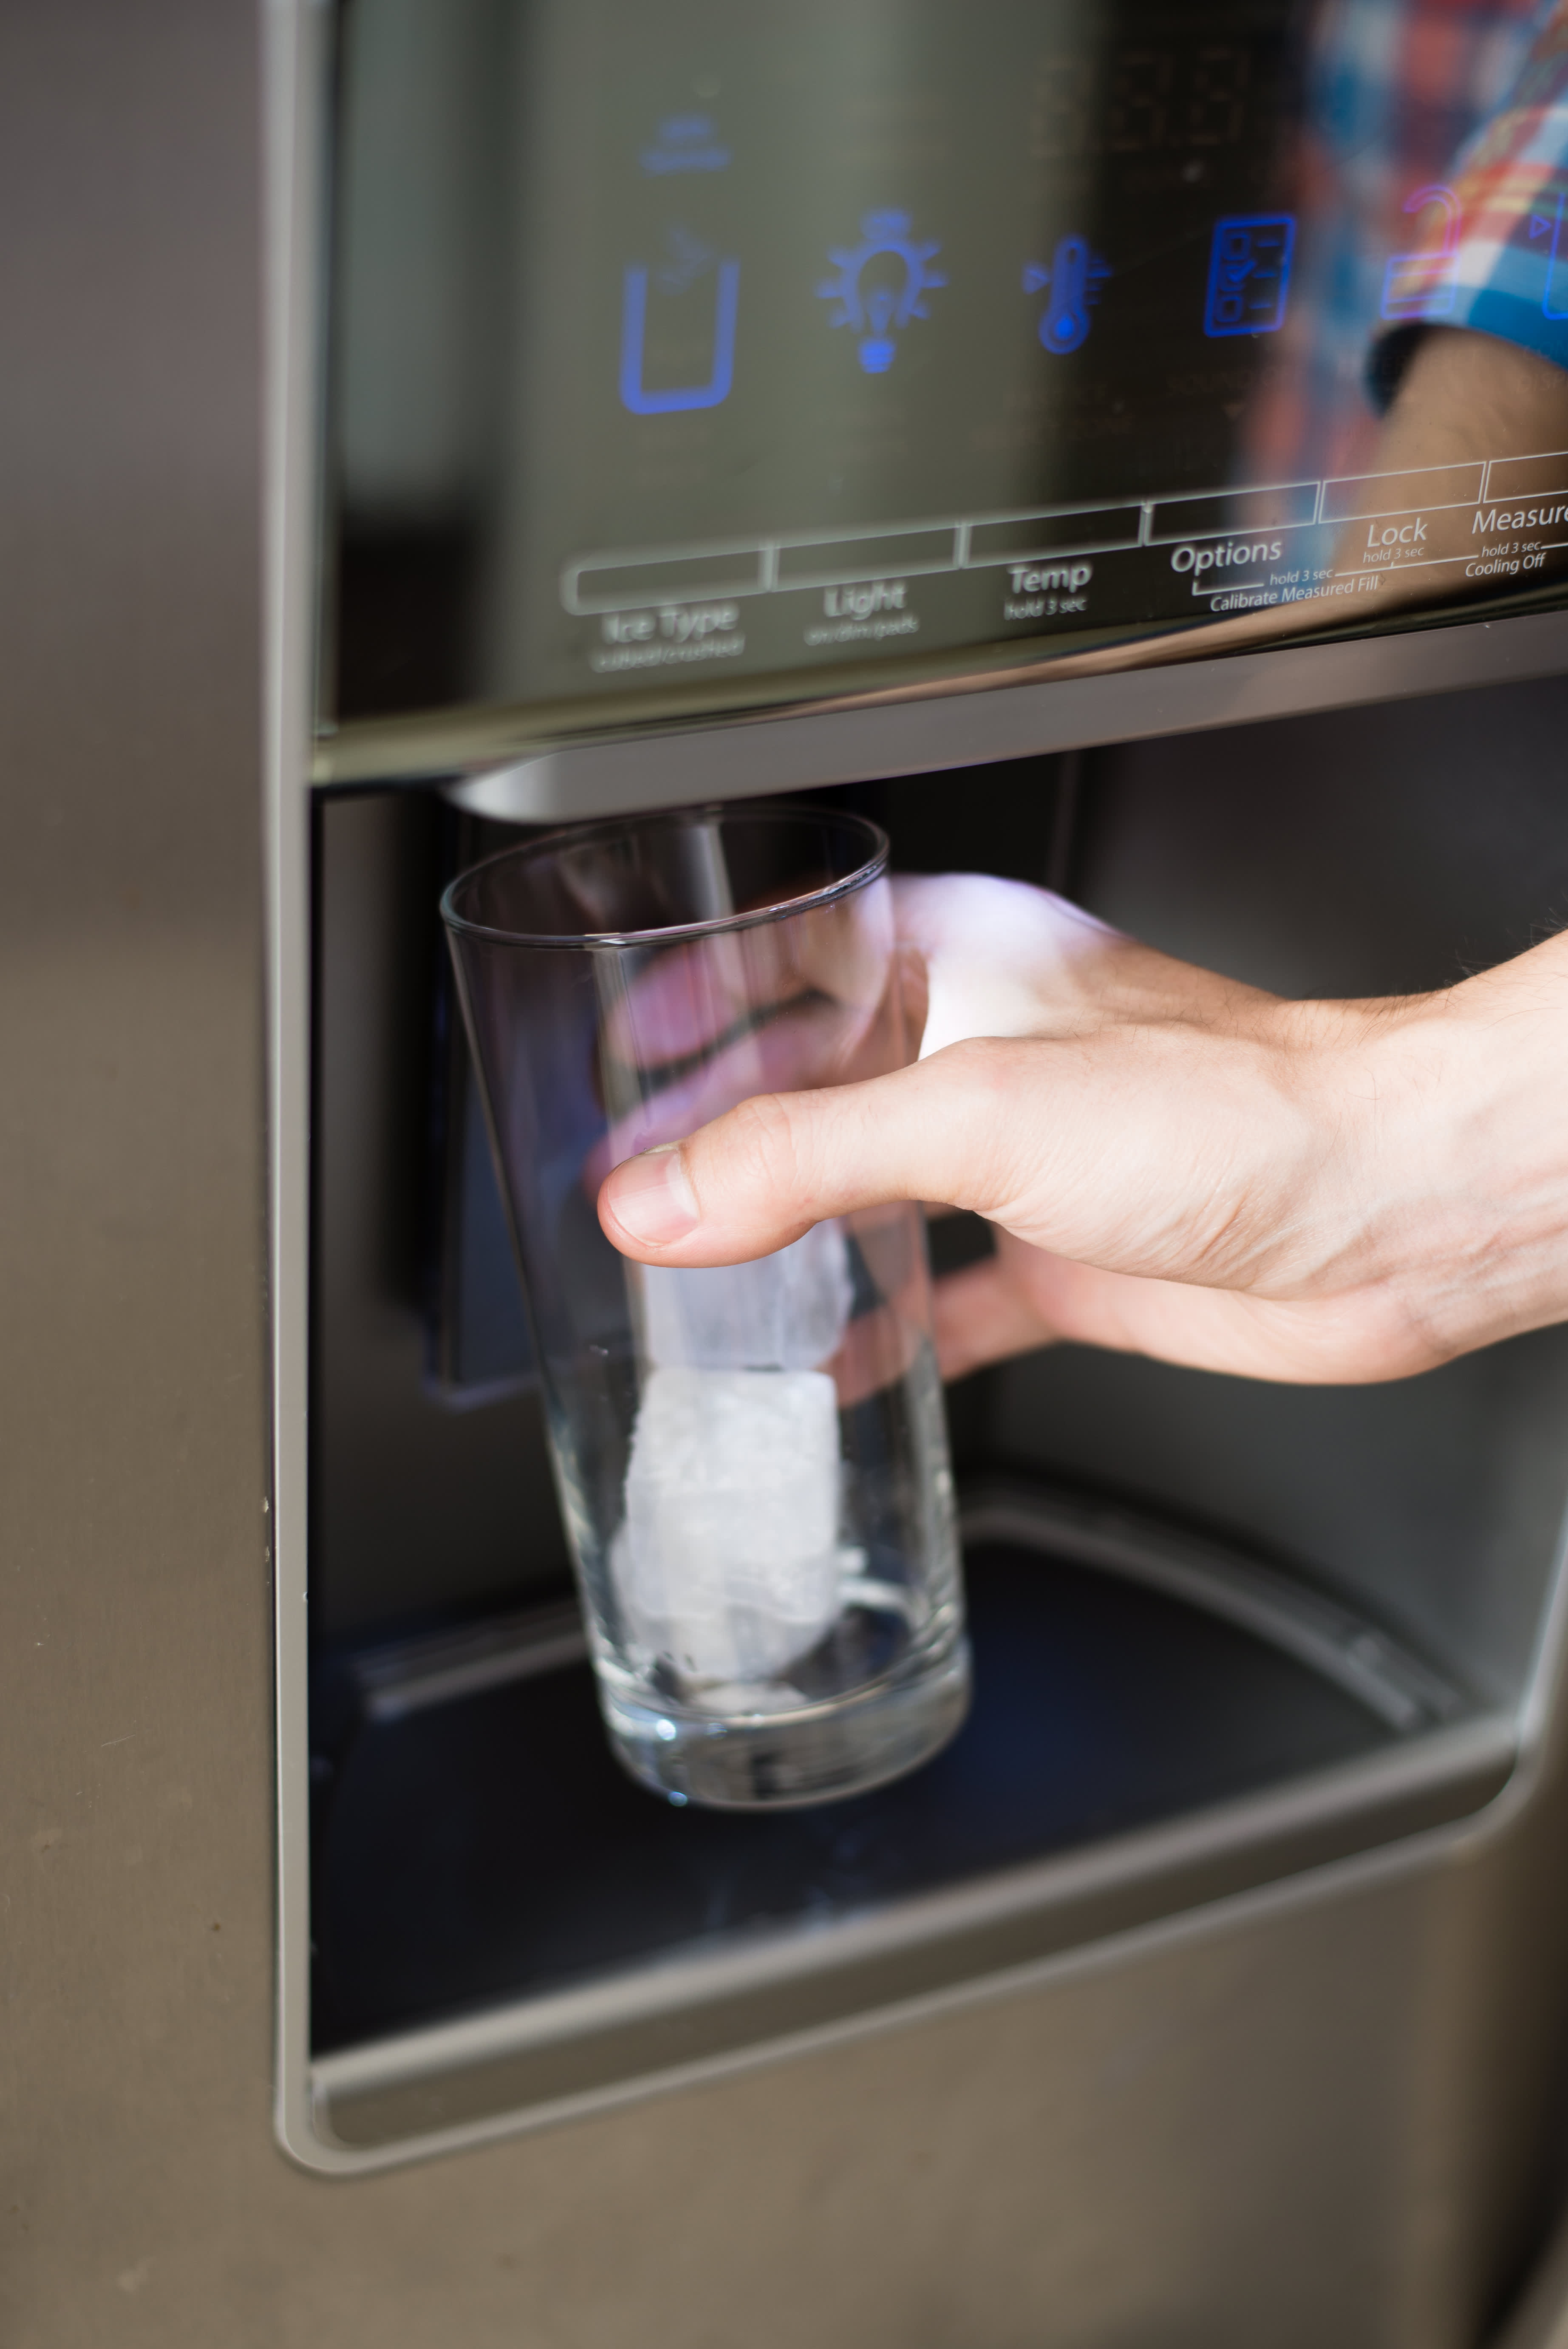 5 Things to Know About Cleaning Your Built-in Ice Maker